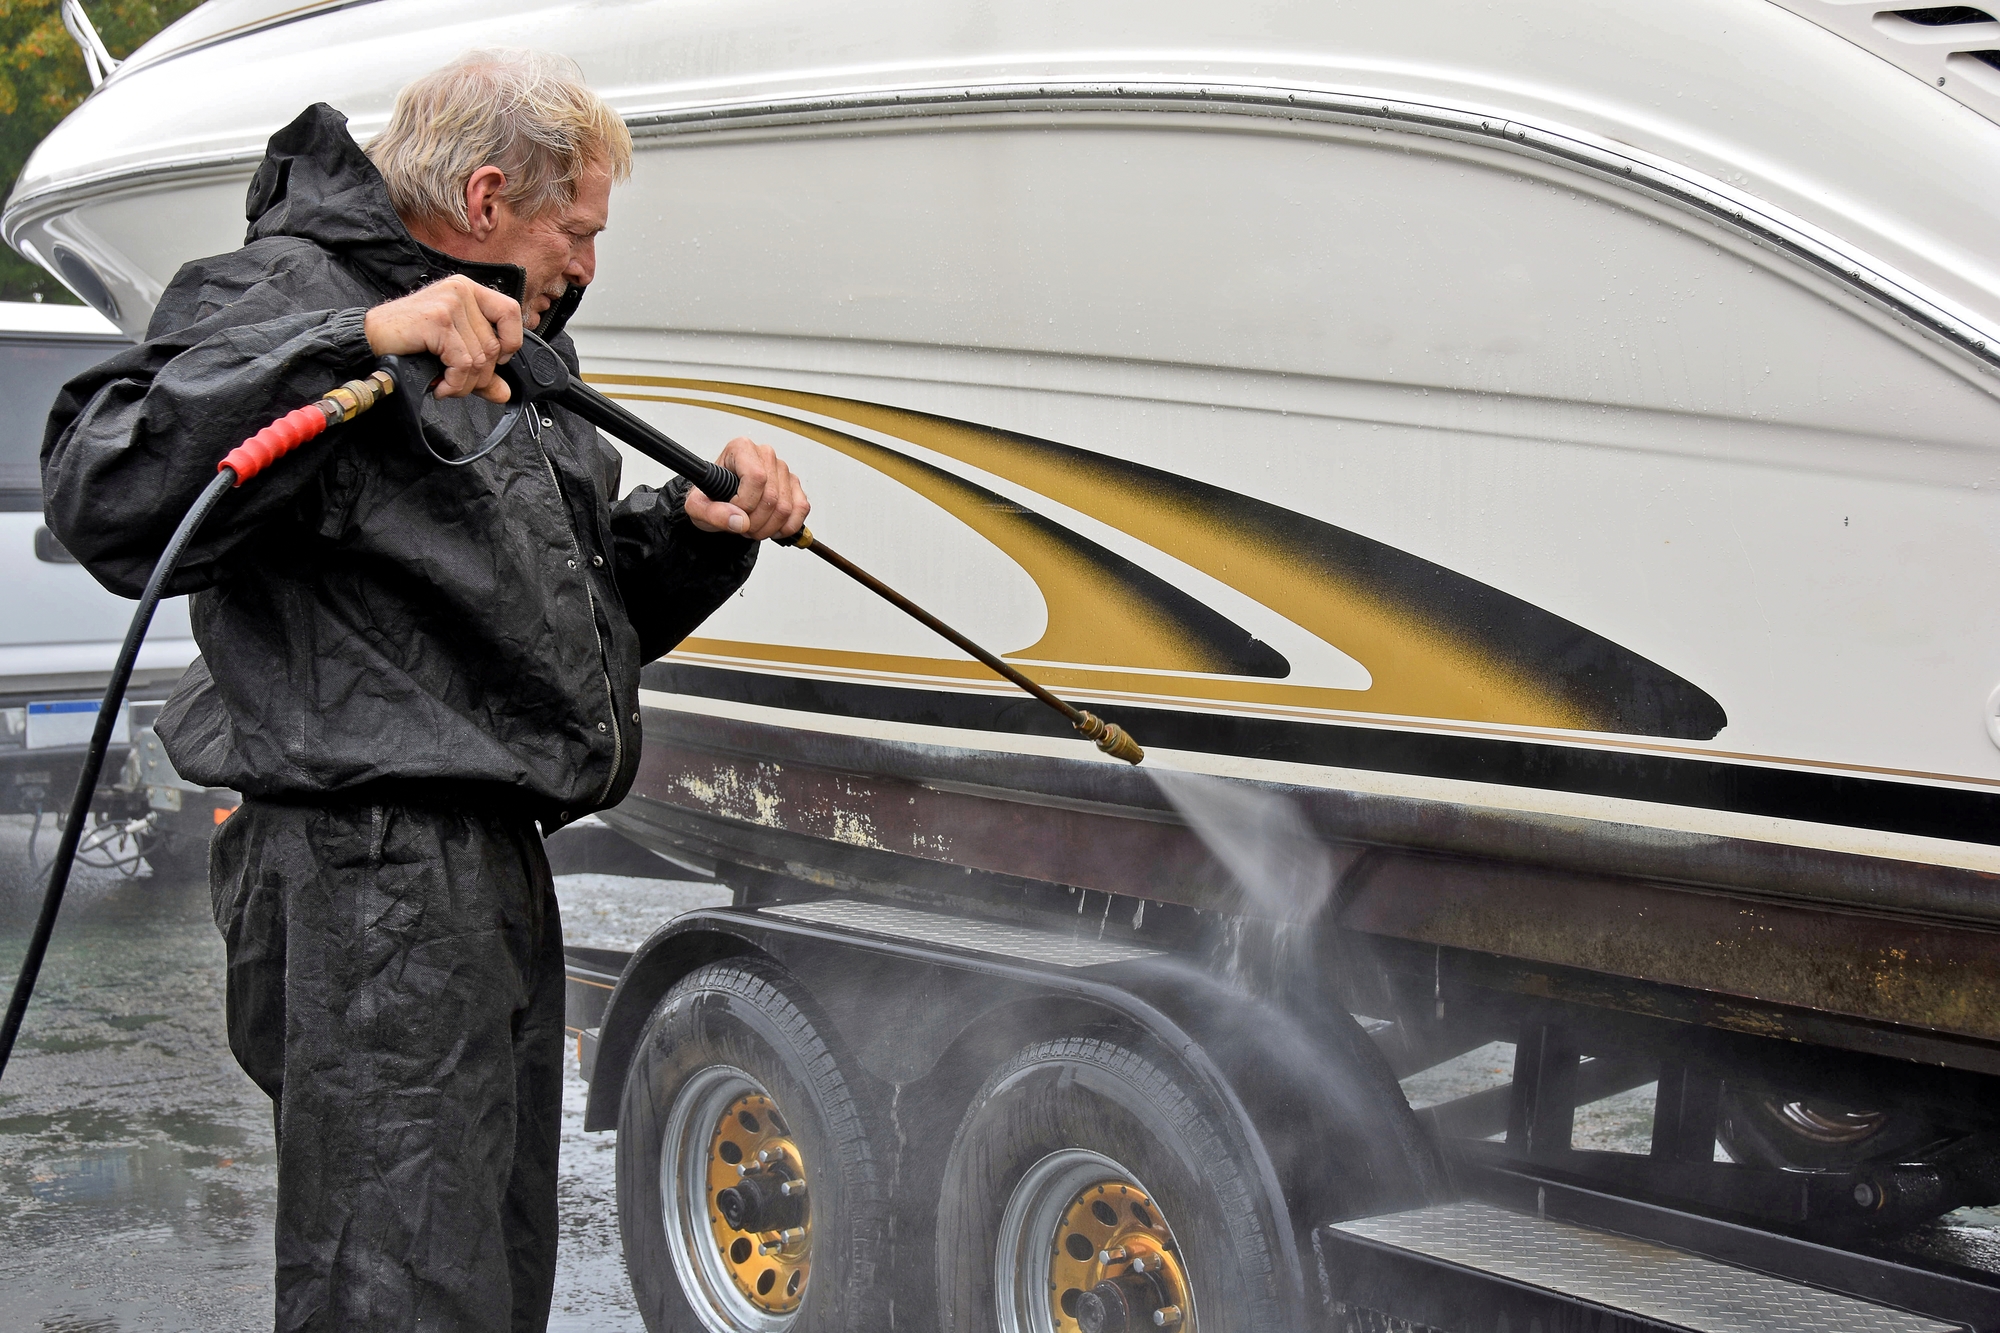 pressure washing a boat hull, cleaning a boat